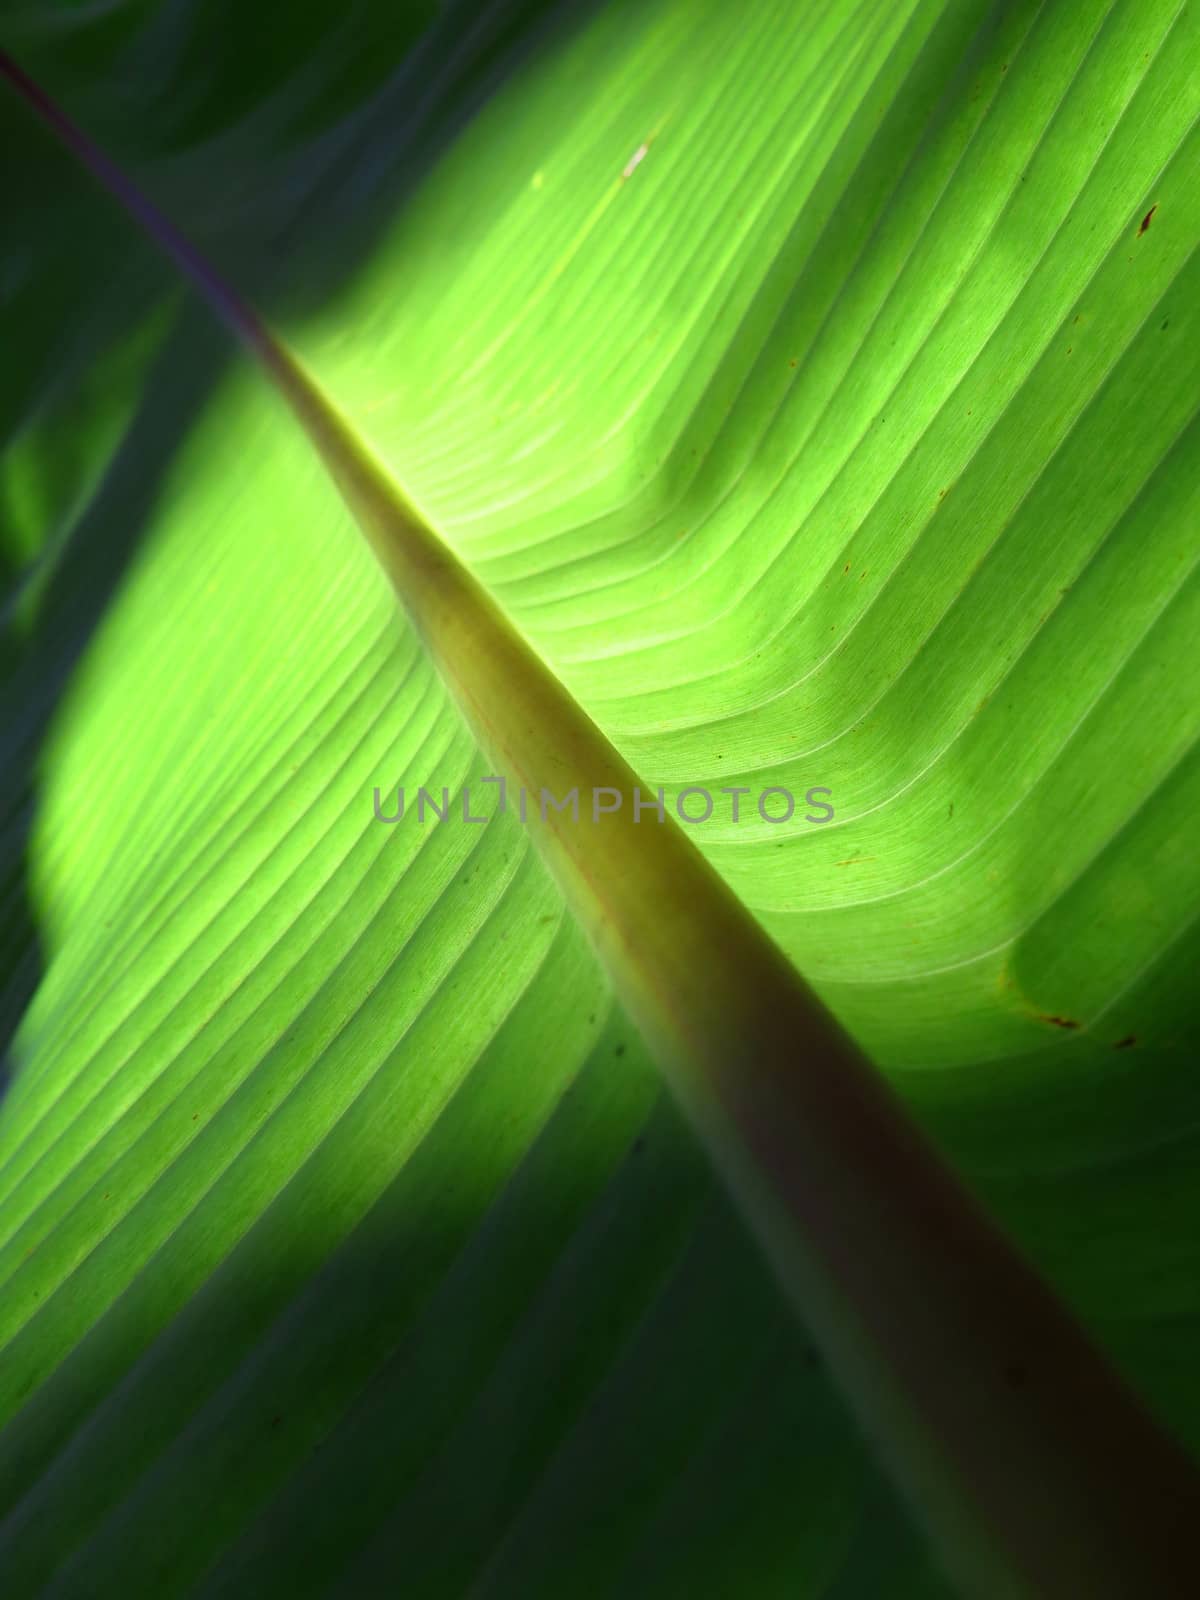 Banana Leaf Light by thefinalmiracle